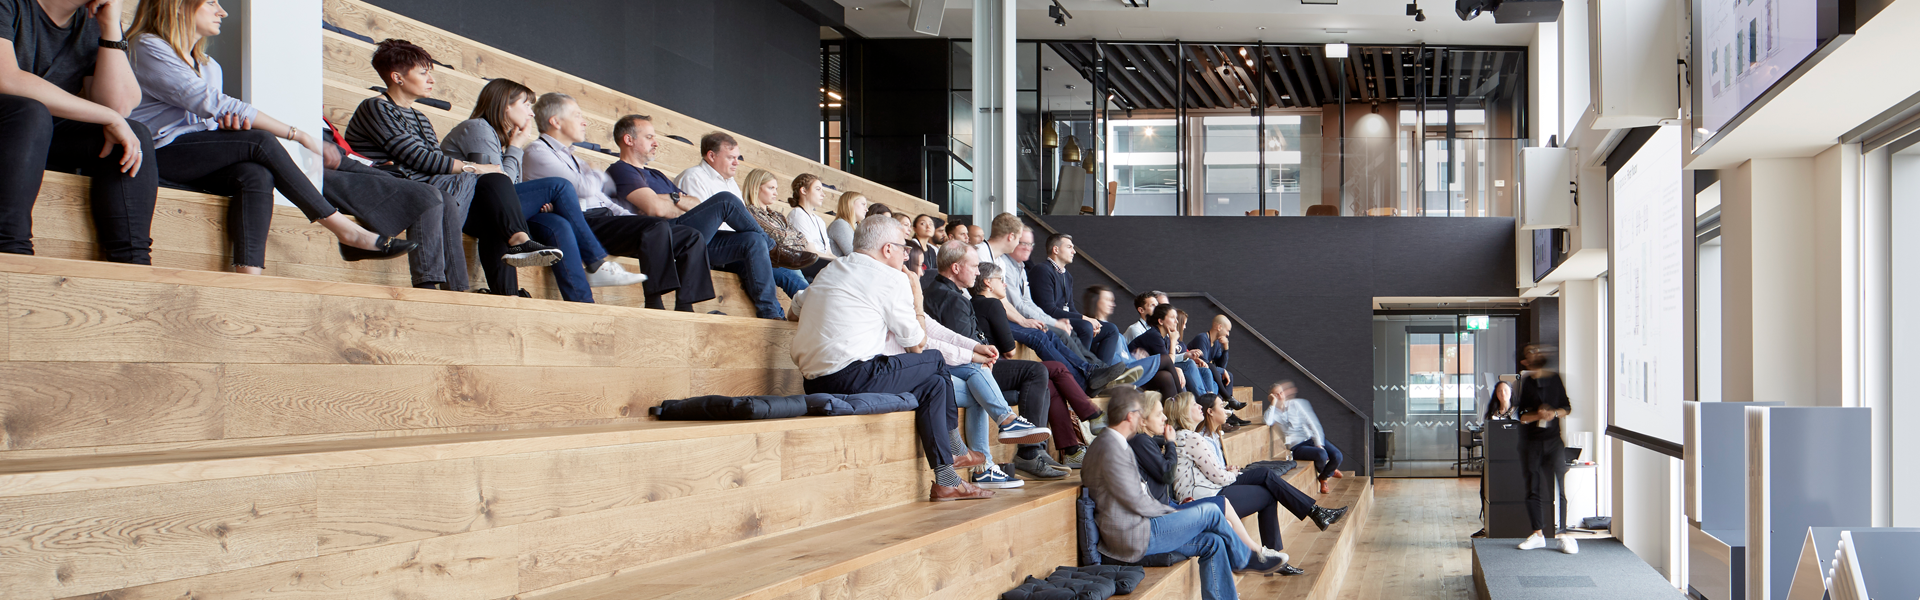 It Takes a Village: Creating Connections at Havas Kings Cross